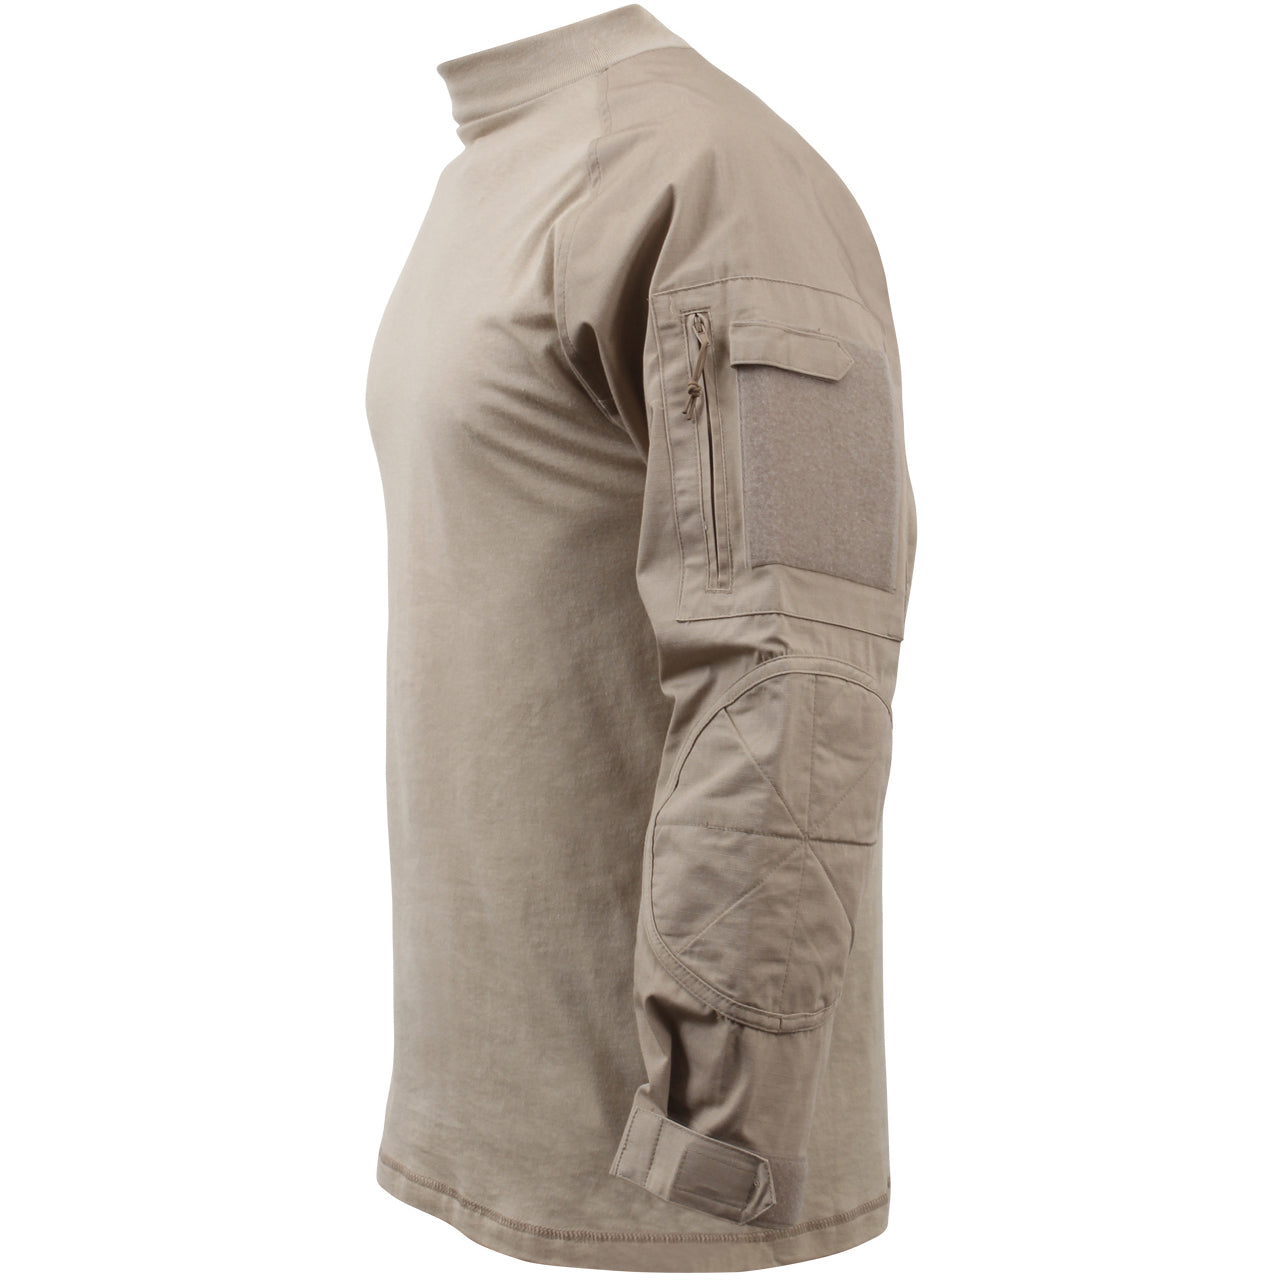 Rothco's Military Combat Shirts Are Made For Comfort But Worn For Protection. The Combat Shirt Is Perfect For Military And Tactical Personnel In The Field To Wear Under Hot, Heavy Body Armor And Tactical Vests. www.defenceqstore.com.au